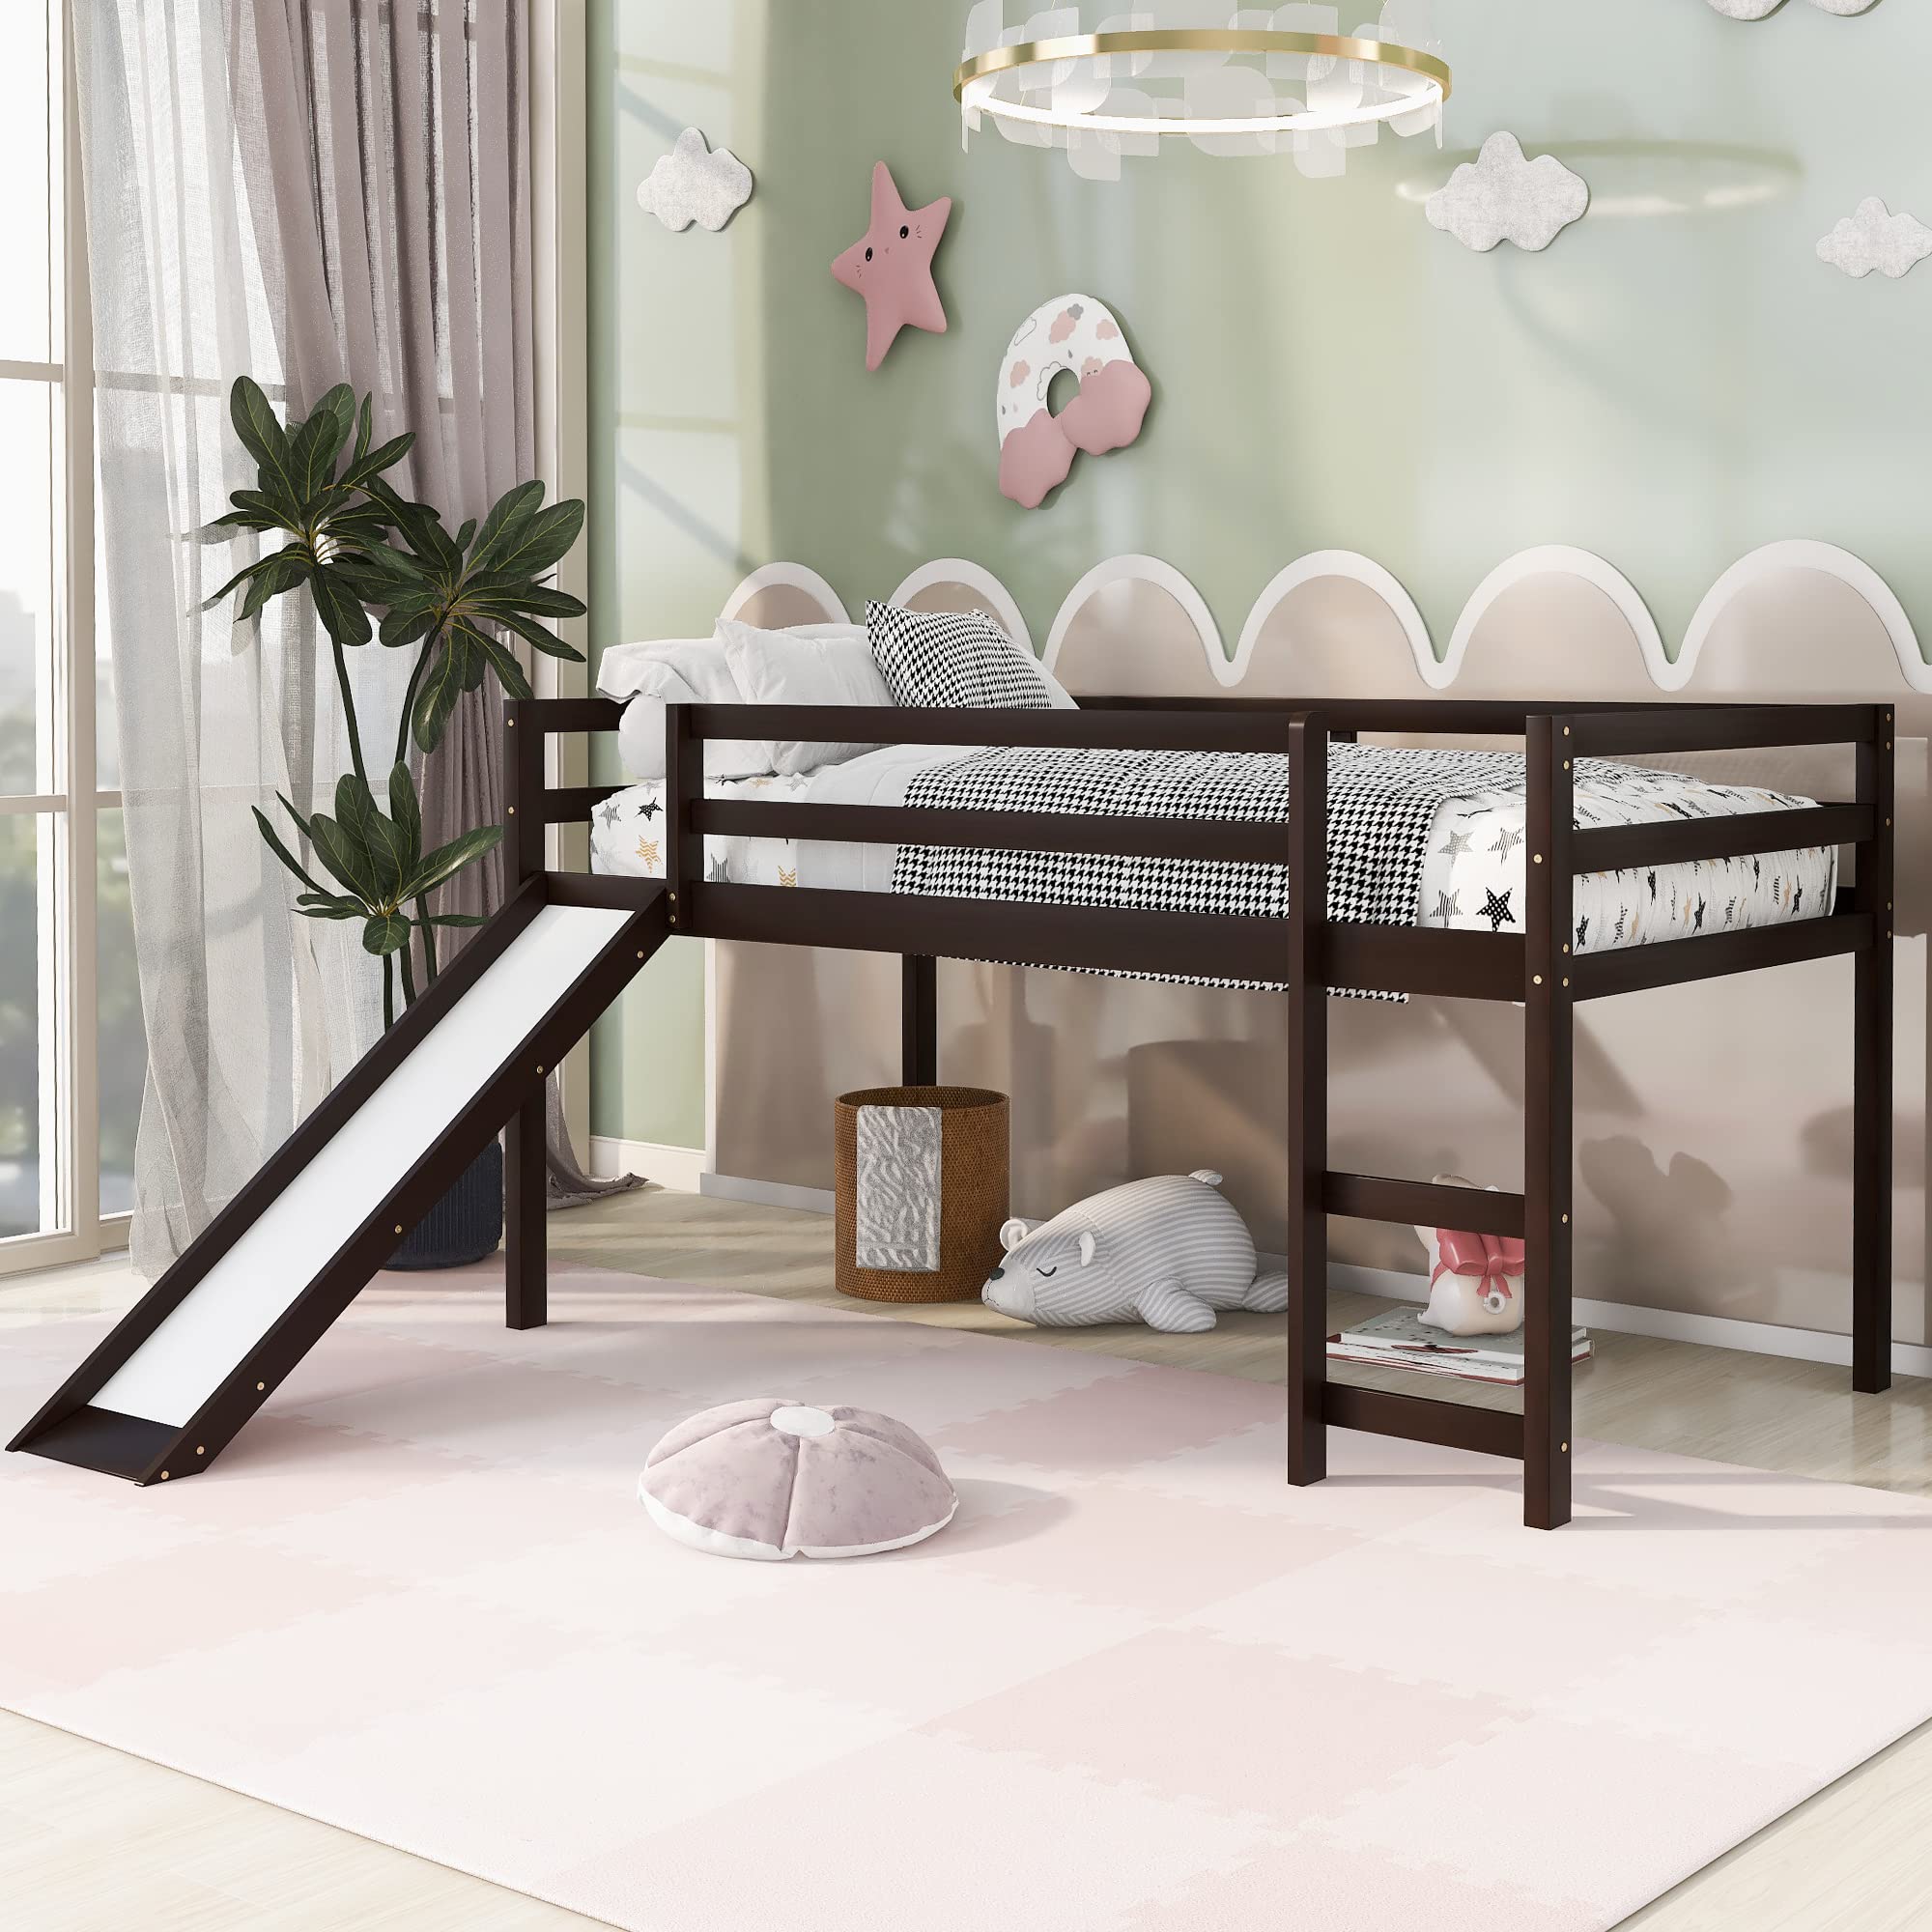 Lostcat Twin Loft Bed with Slide, Low Loft Bed with Stairs and Chalkboard, Wood Twin Bed Frame for Kids with Slide, Space-Saving Wooden Child Bed Frame for Boys or Girls, Espresso - Lostcat